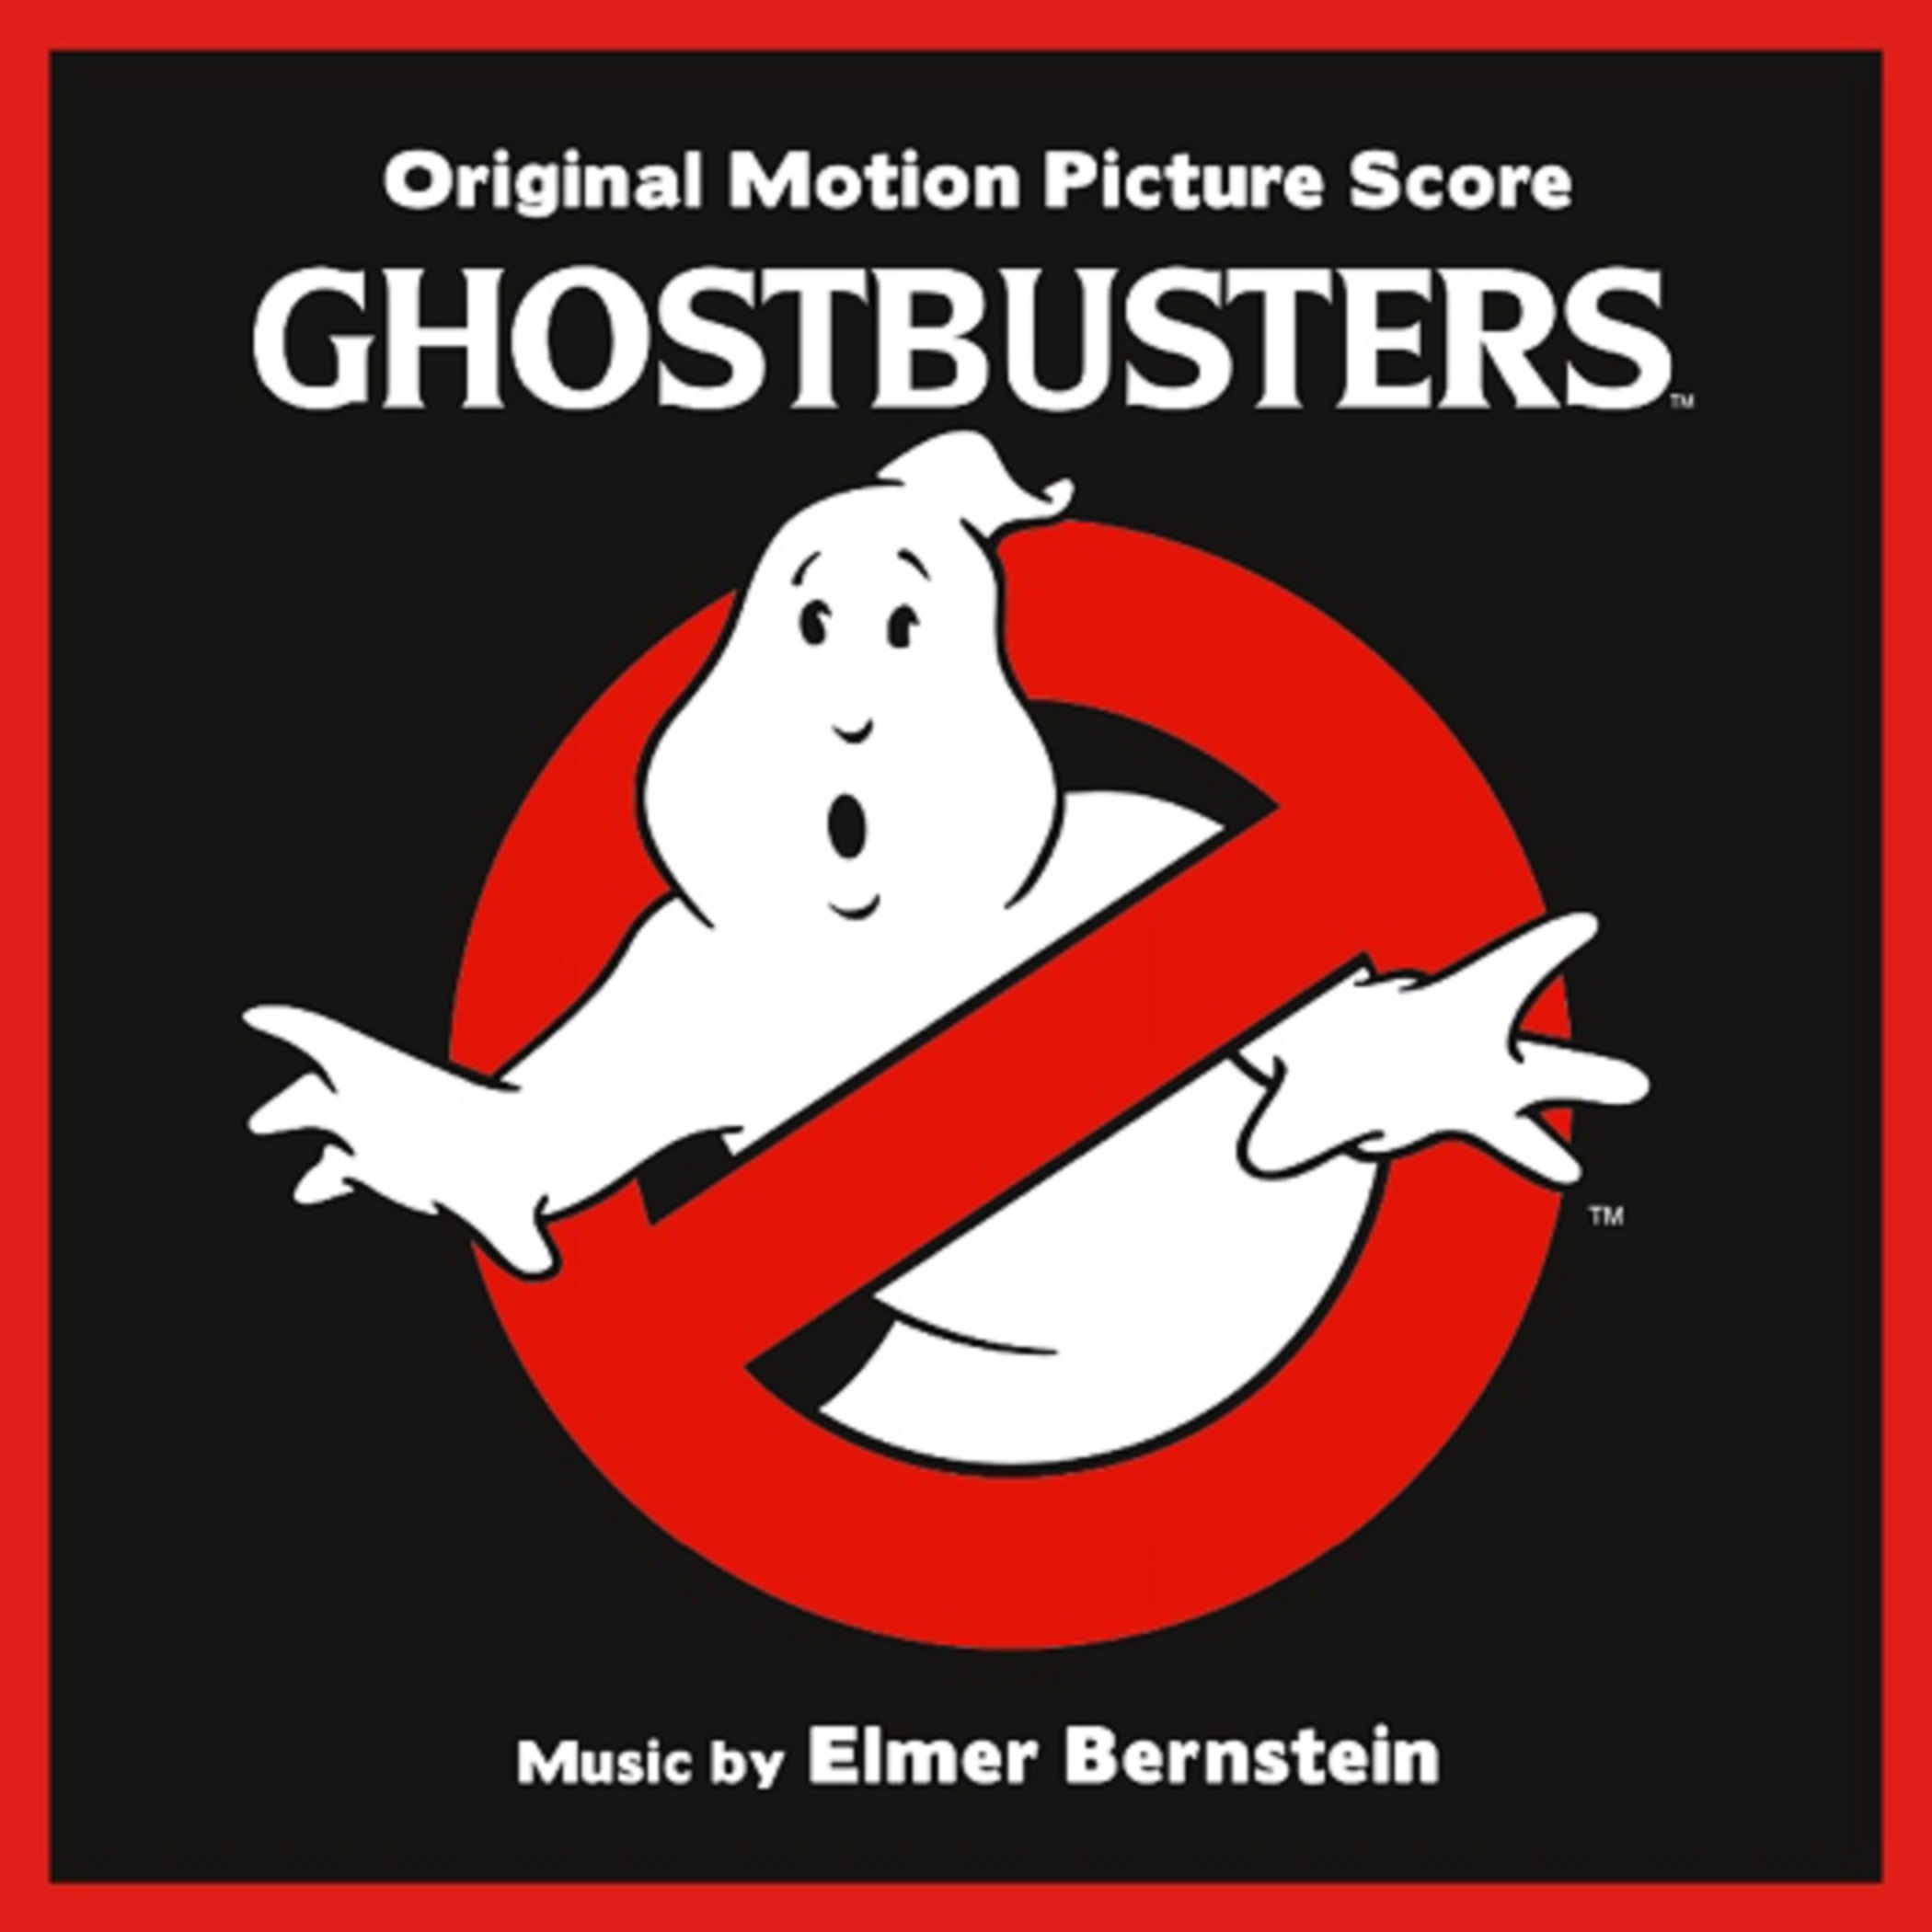 GHOSTBUSTERS Original Motion Picture Score Available Digitally